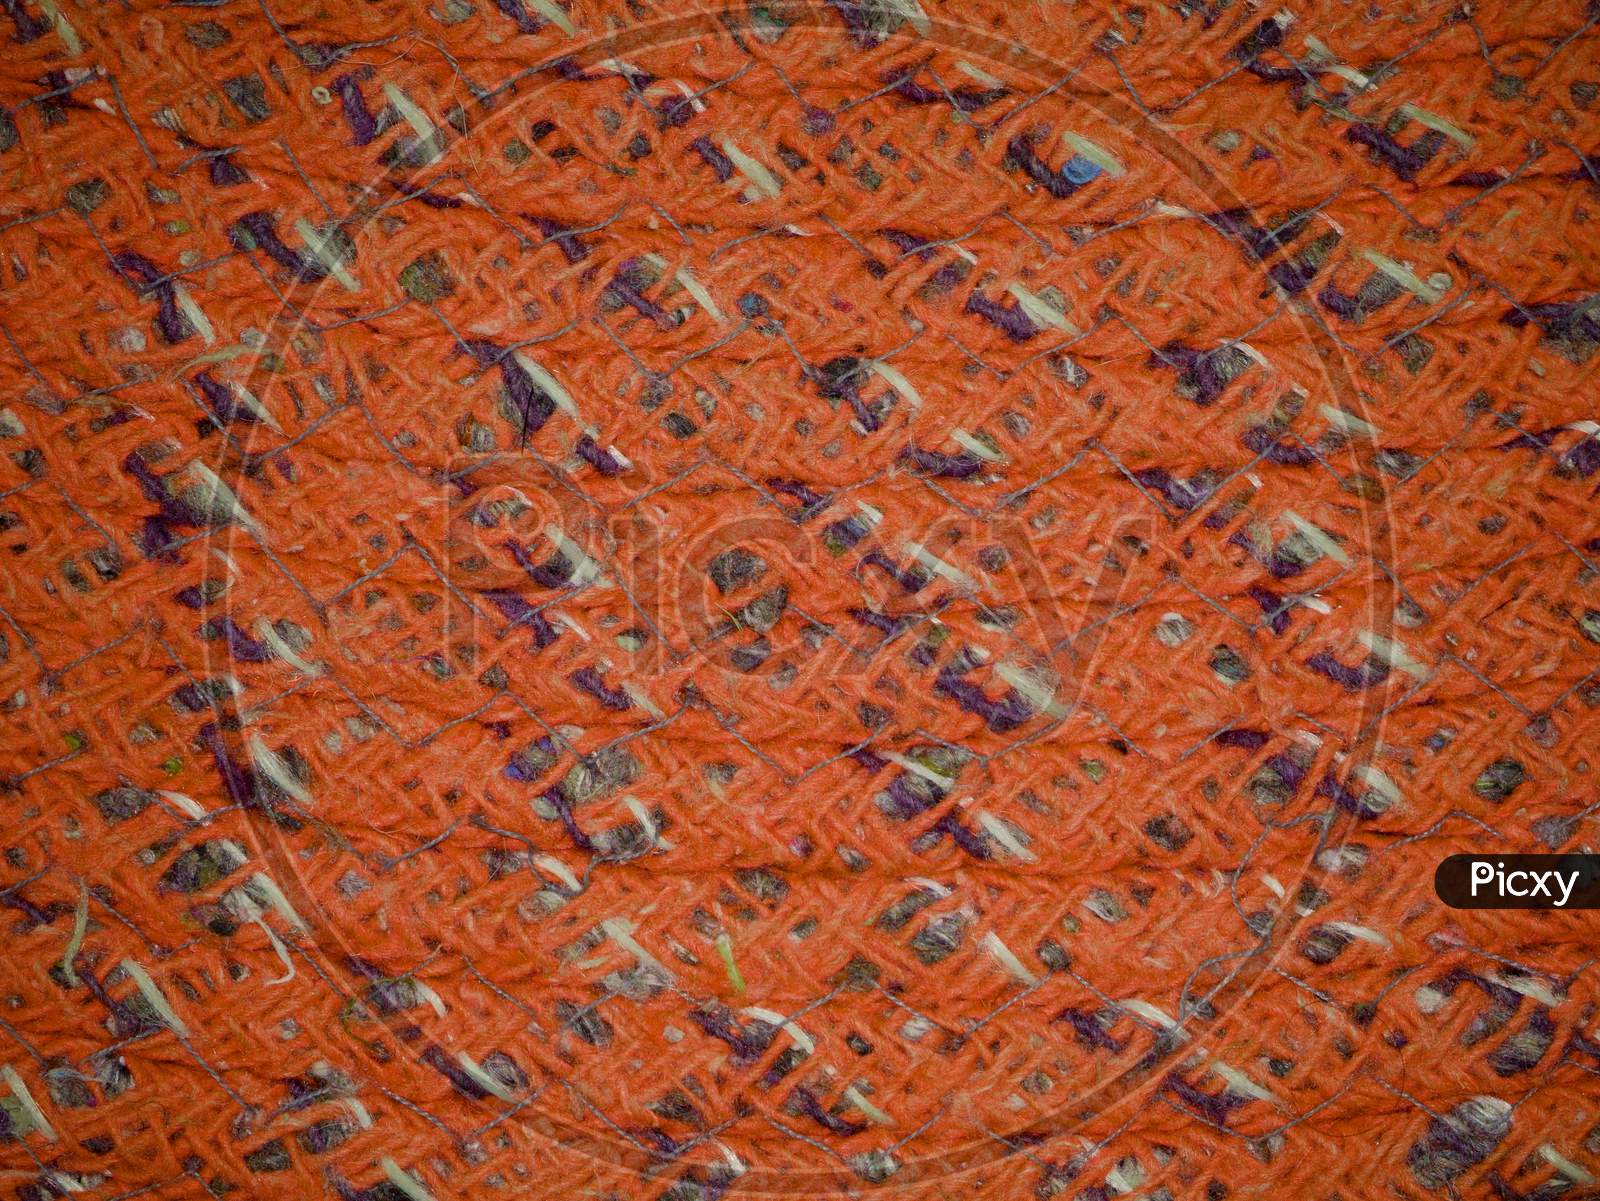 Orange Color Cloth Texture With Mixed Design Pattern.